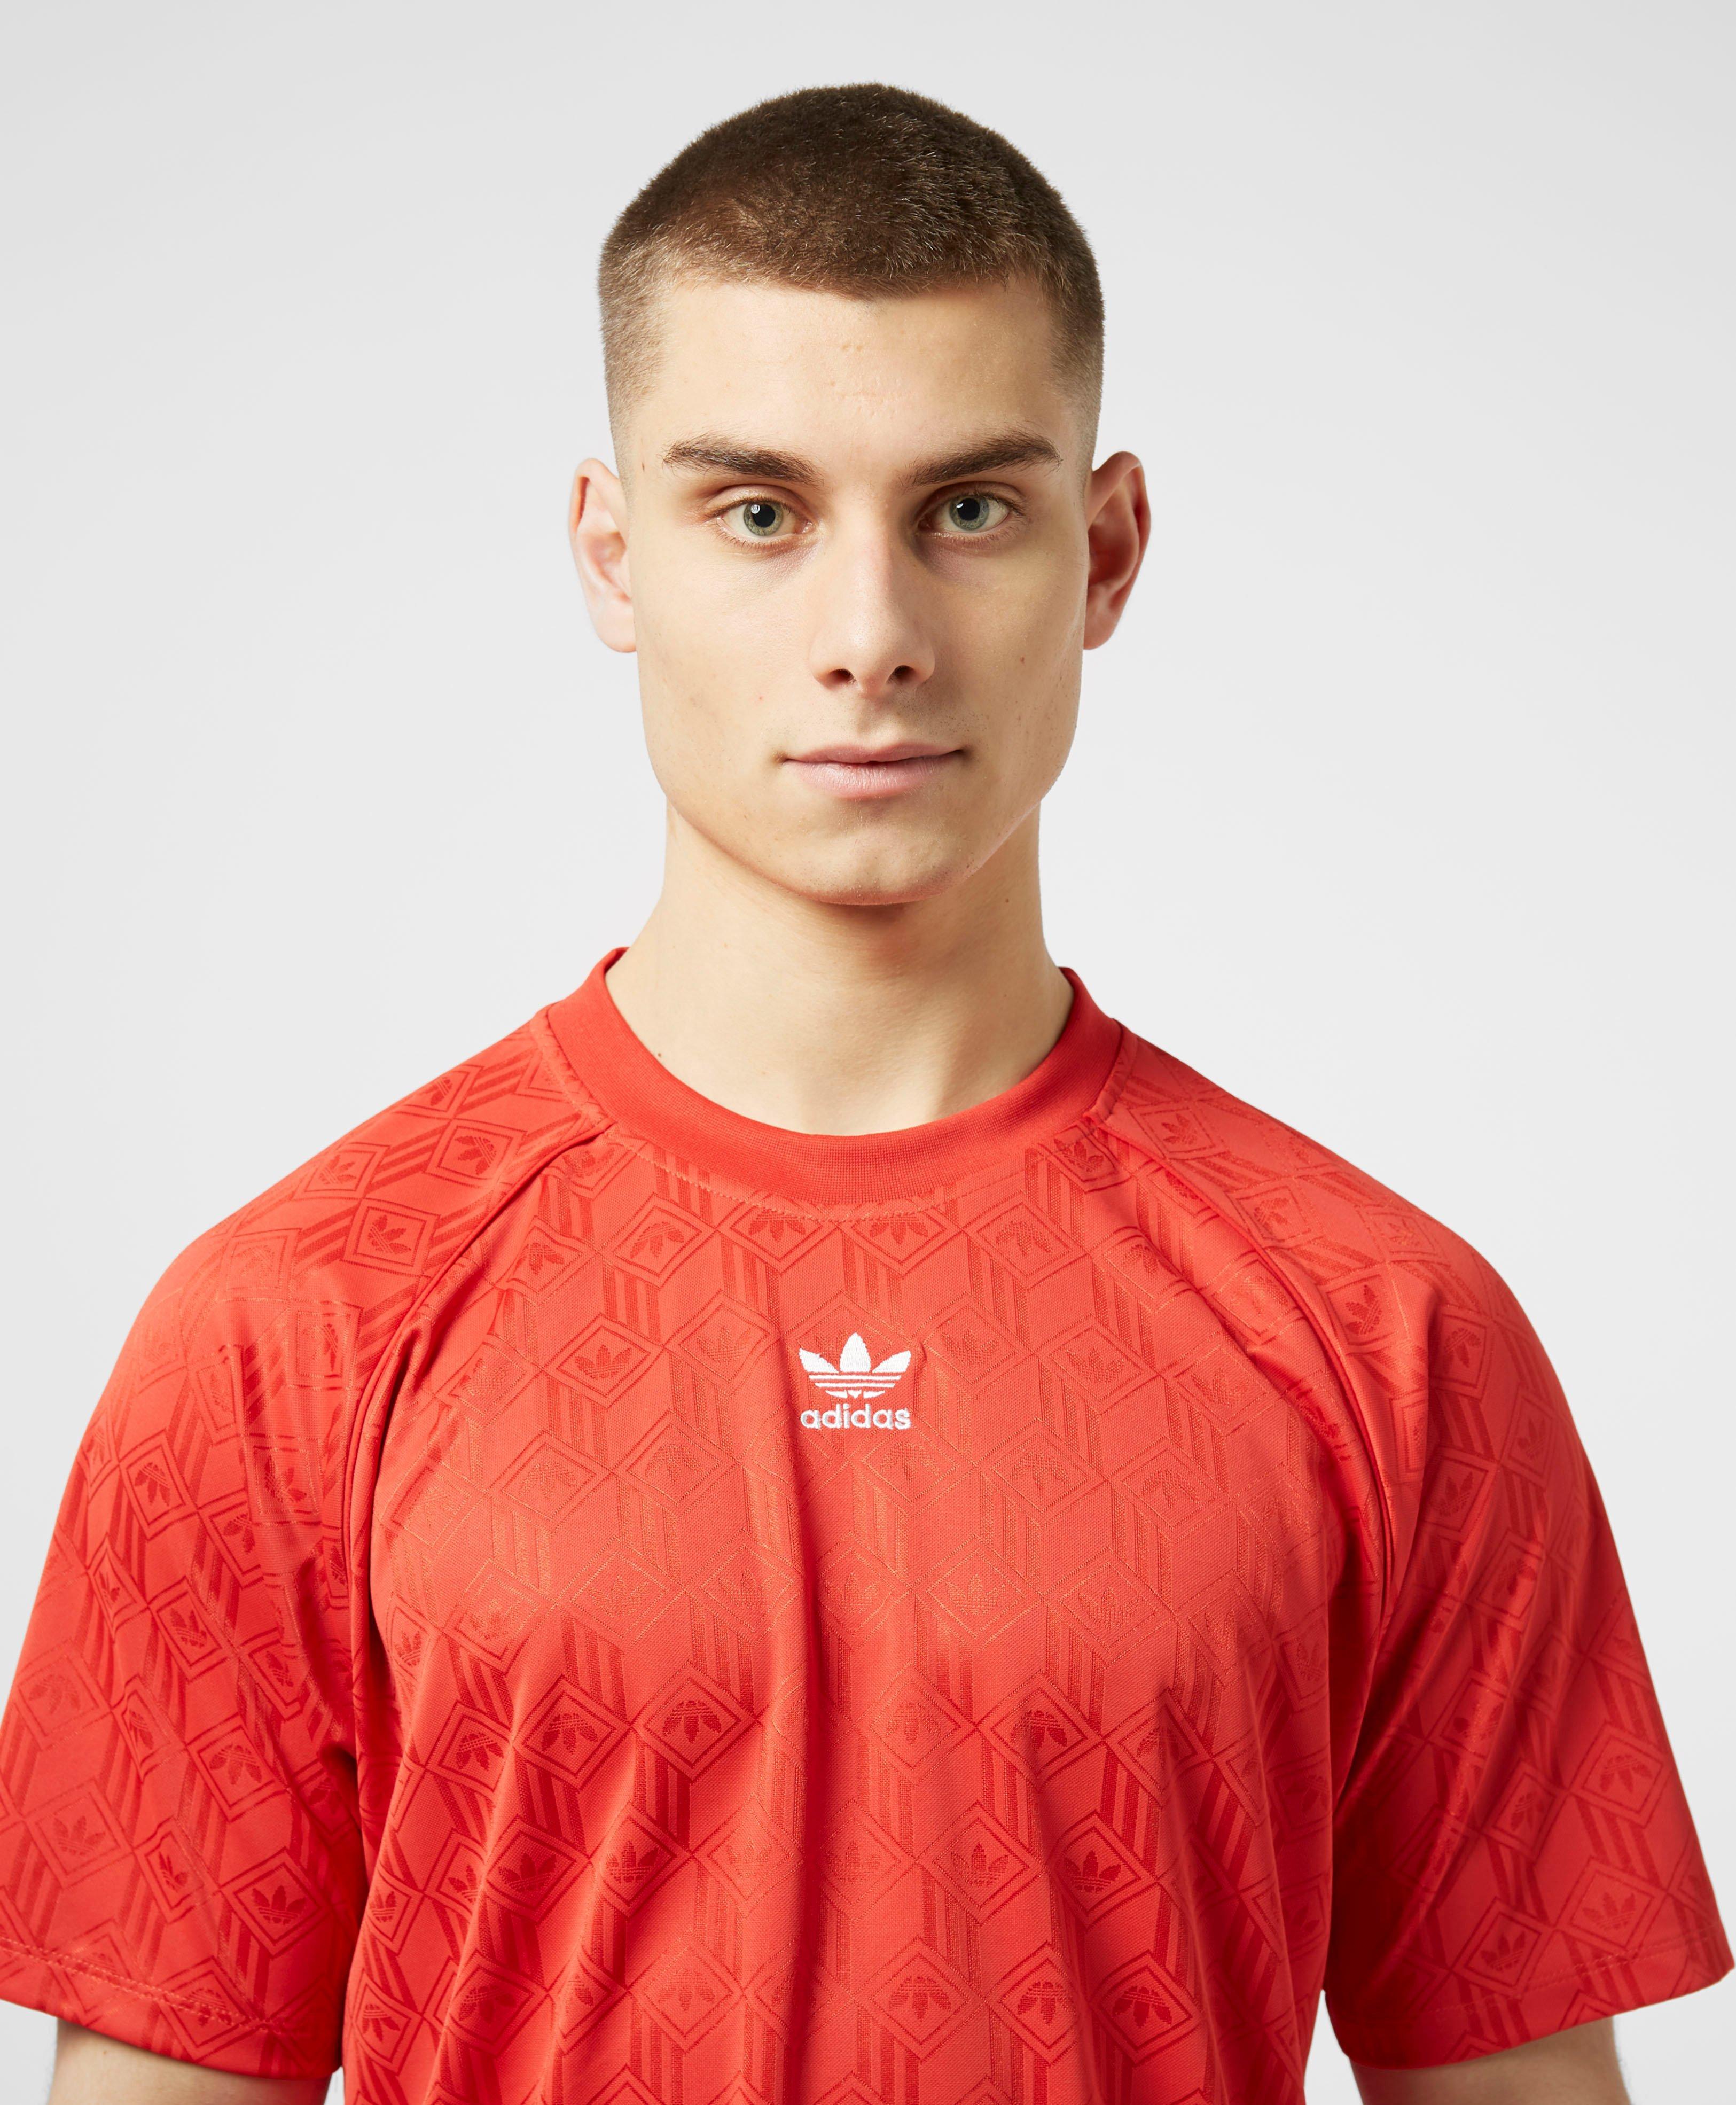 adidas Originals Synthetic Mono Jersey in Red for Men - Lyst